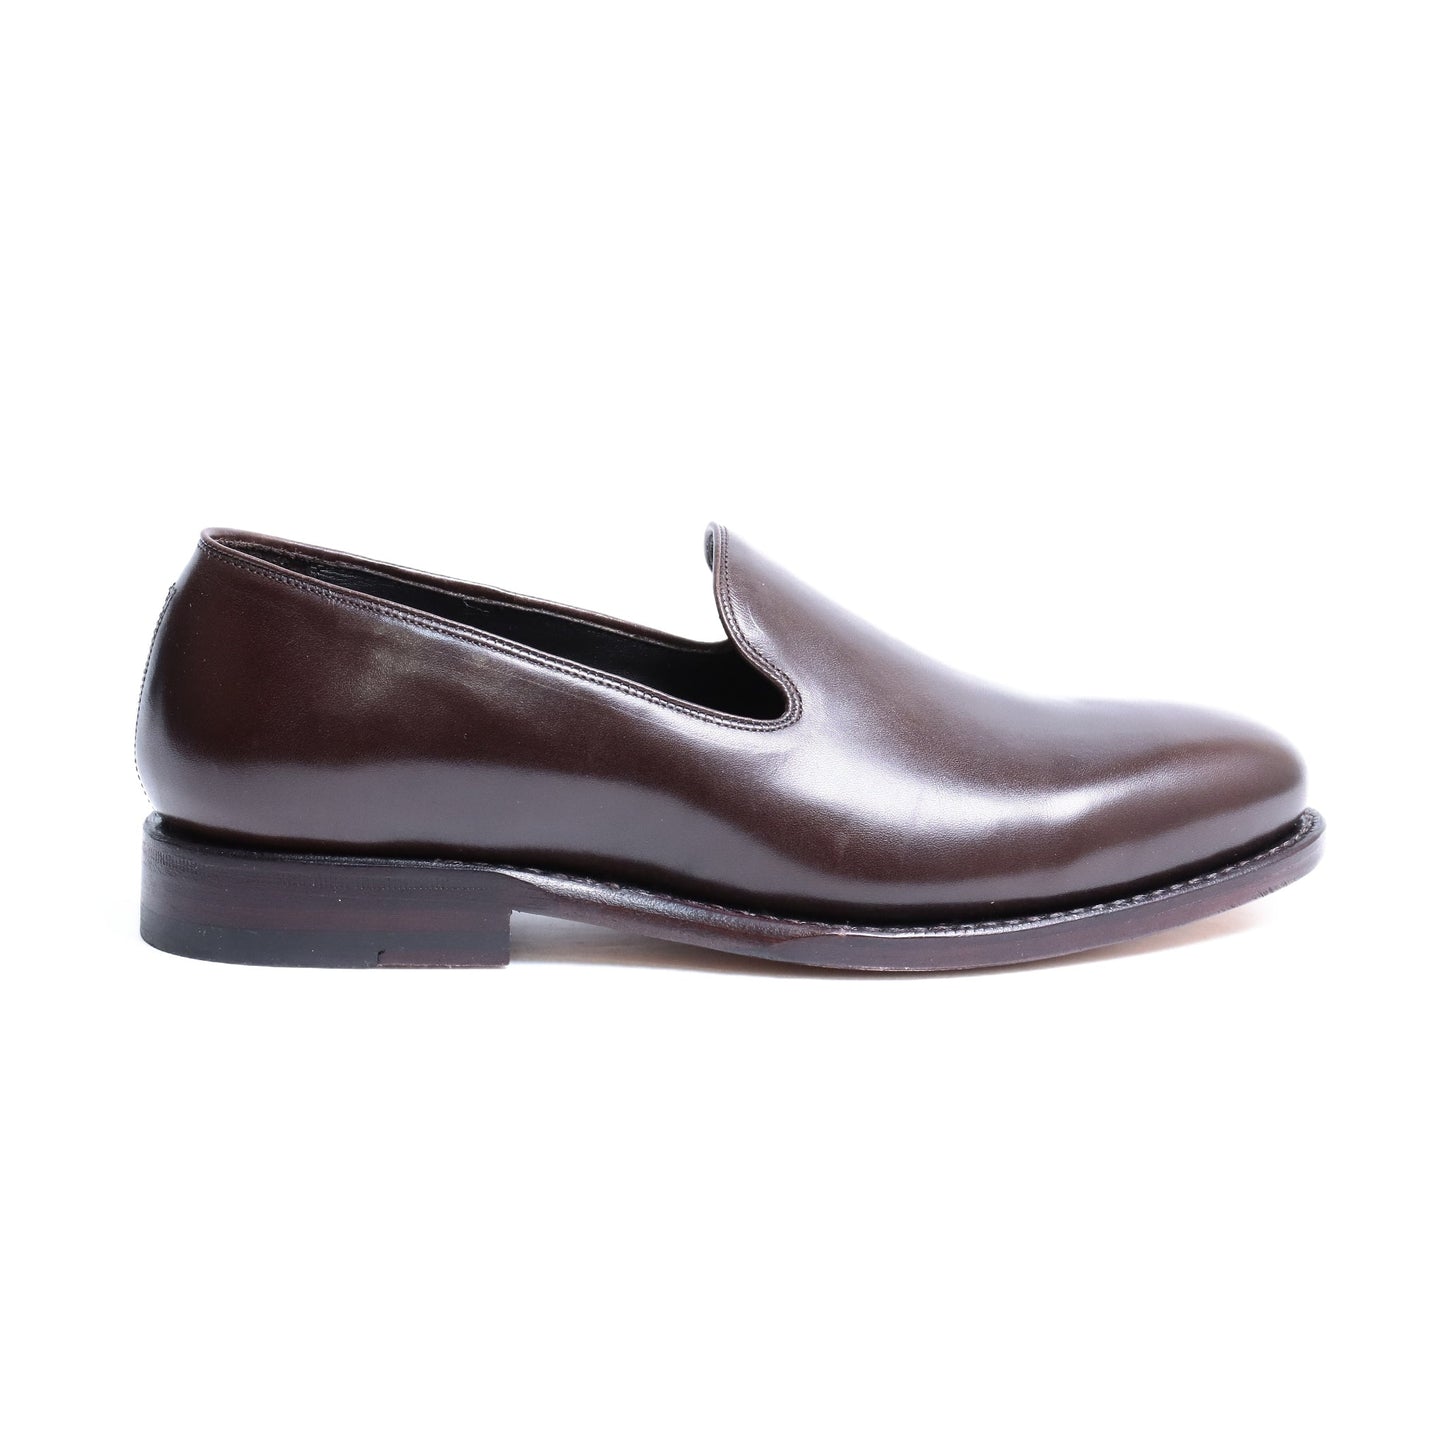 98813 / CALF / D.BROWN / LEATHER SOLE / UK6.5(25.0cm)